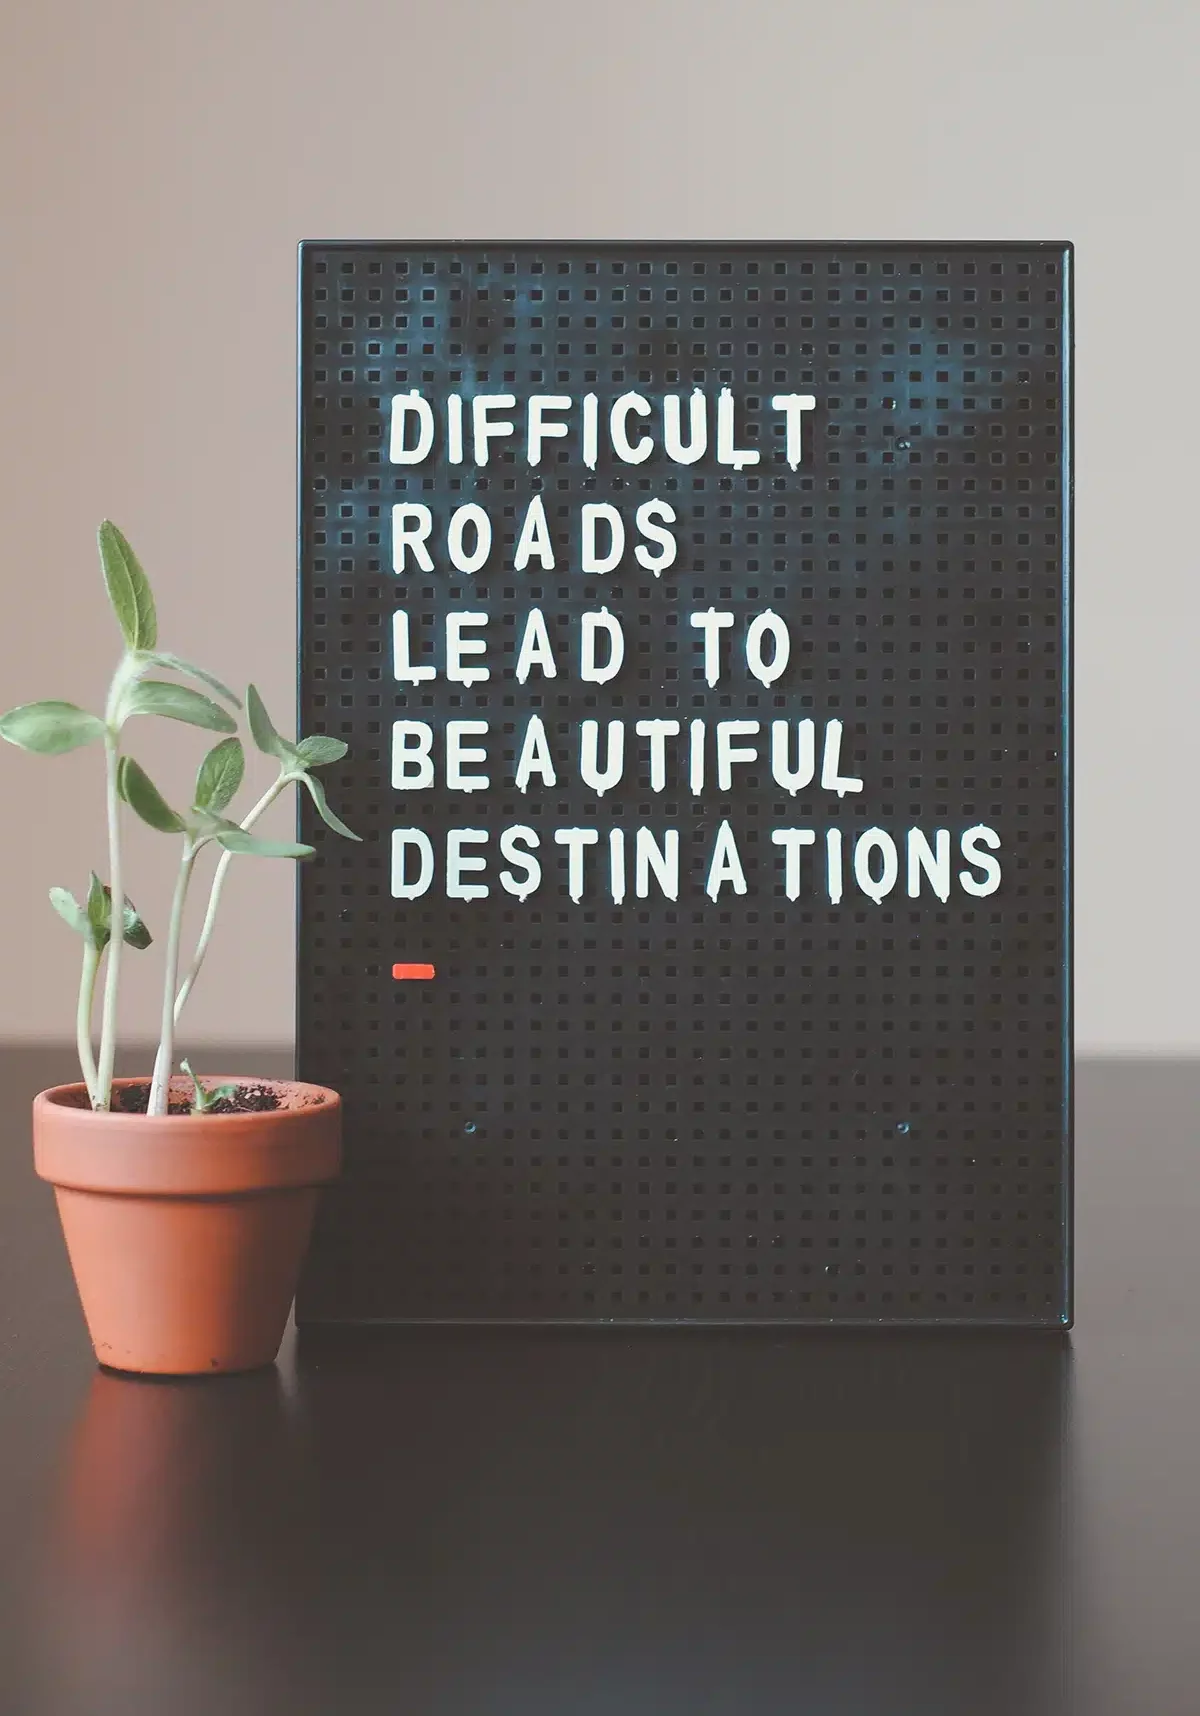 A sign saying "Difficult Roads Lead to Beautiful Designations" being used as a photo illustration for family therapy in a day treatment program